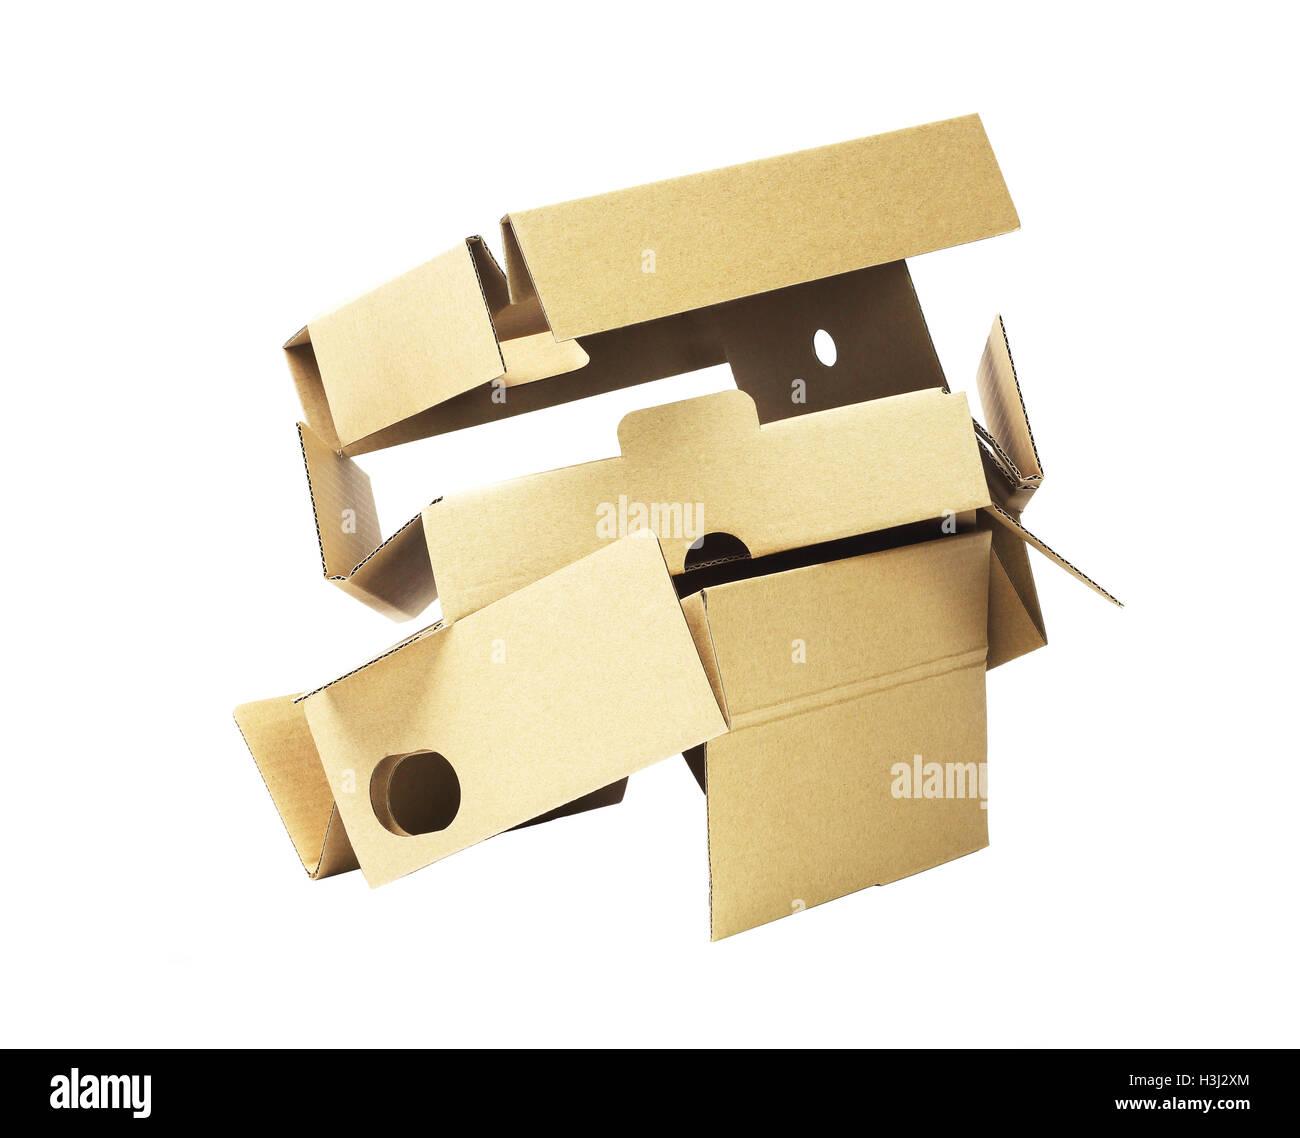 Discarded Packaging Cardboard For Recycling on White Background Stock Photo